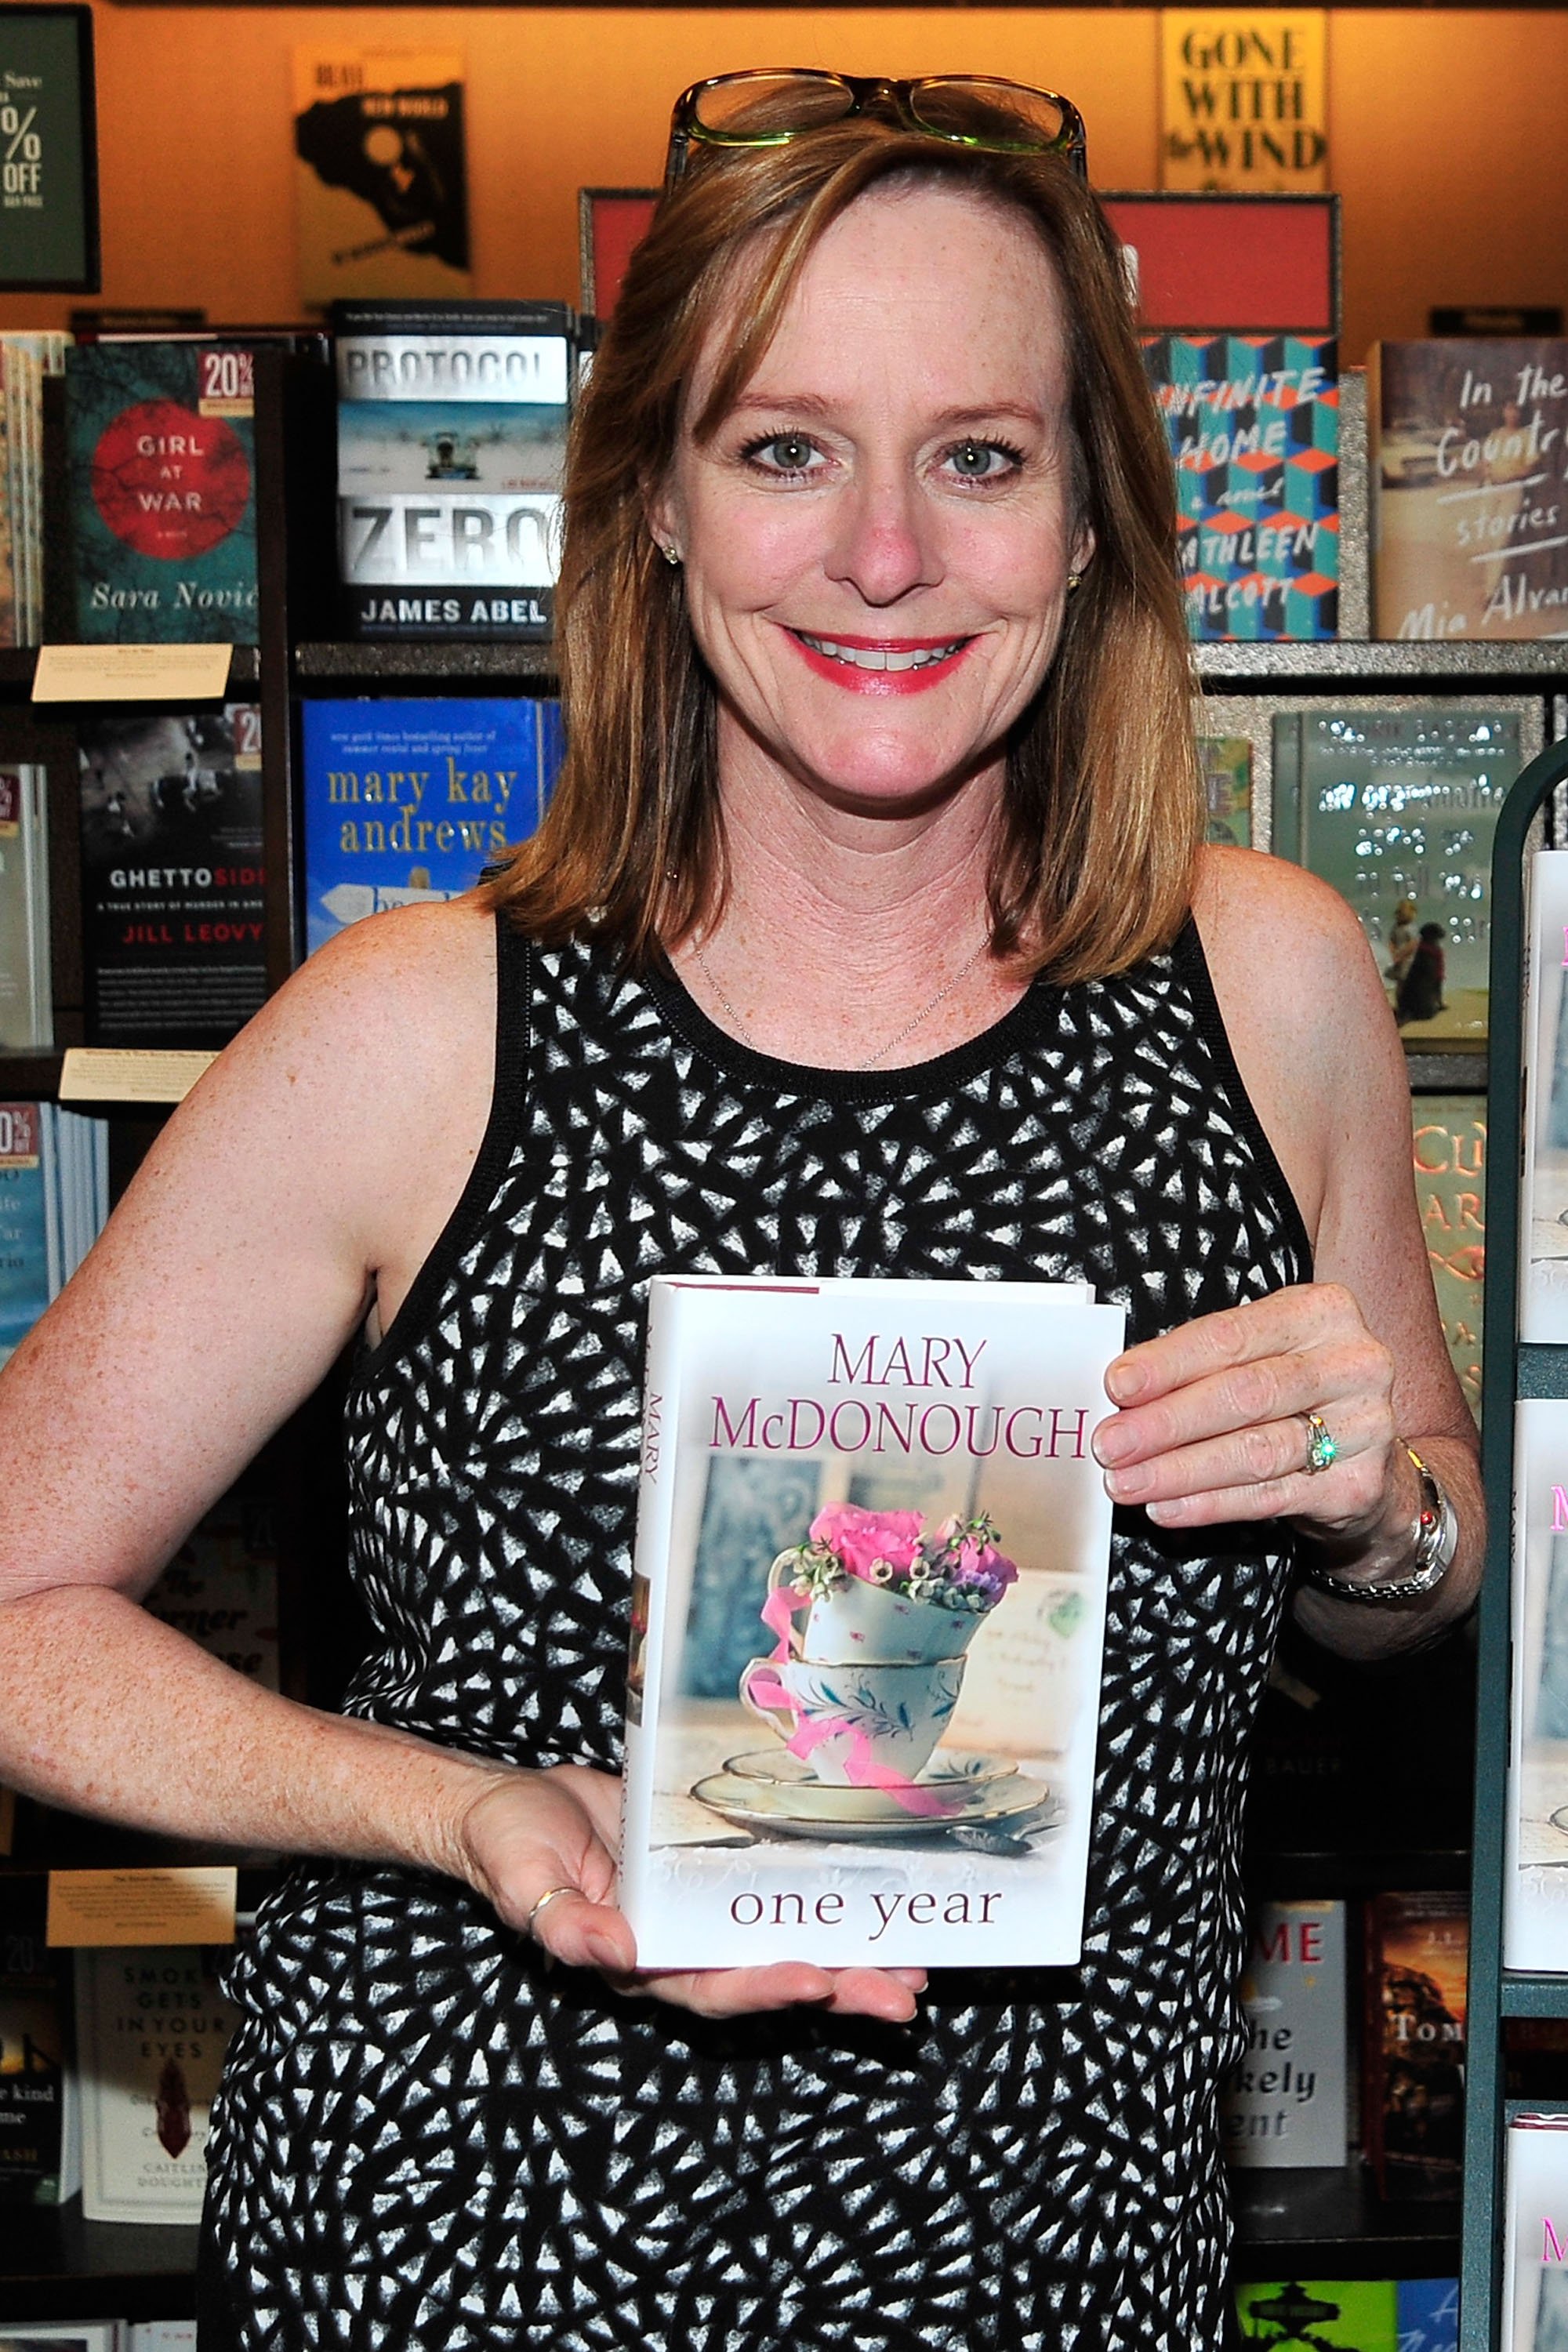 Actress Mary McDonough signs copies of her latest book 'One Year' at Barnes & Noble on August 3, 2015 in Huntington Beach, California | Source: Getty Images